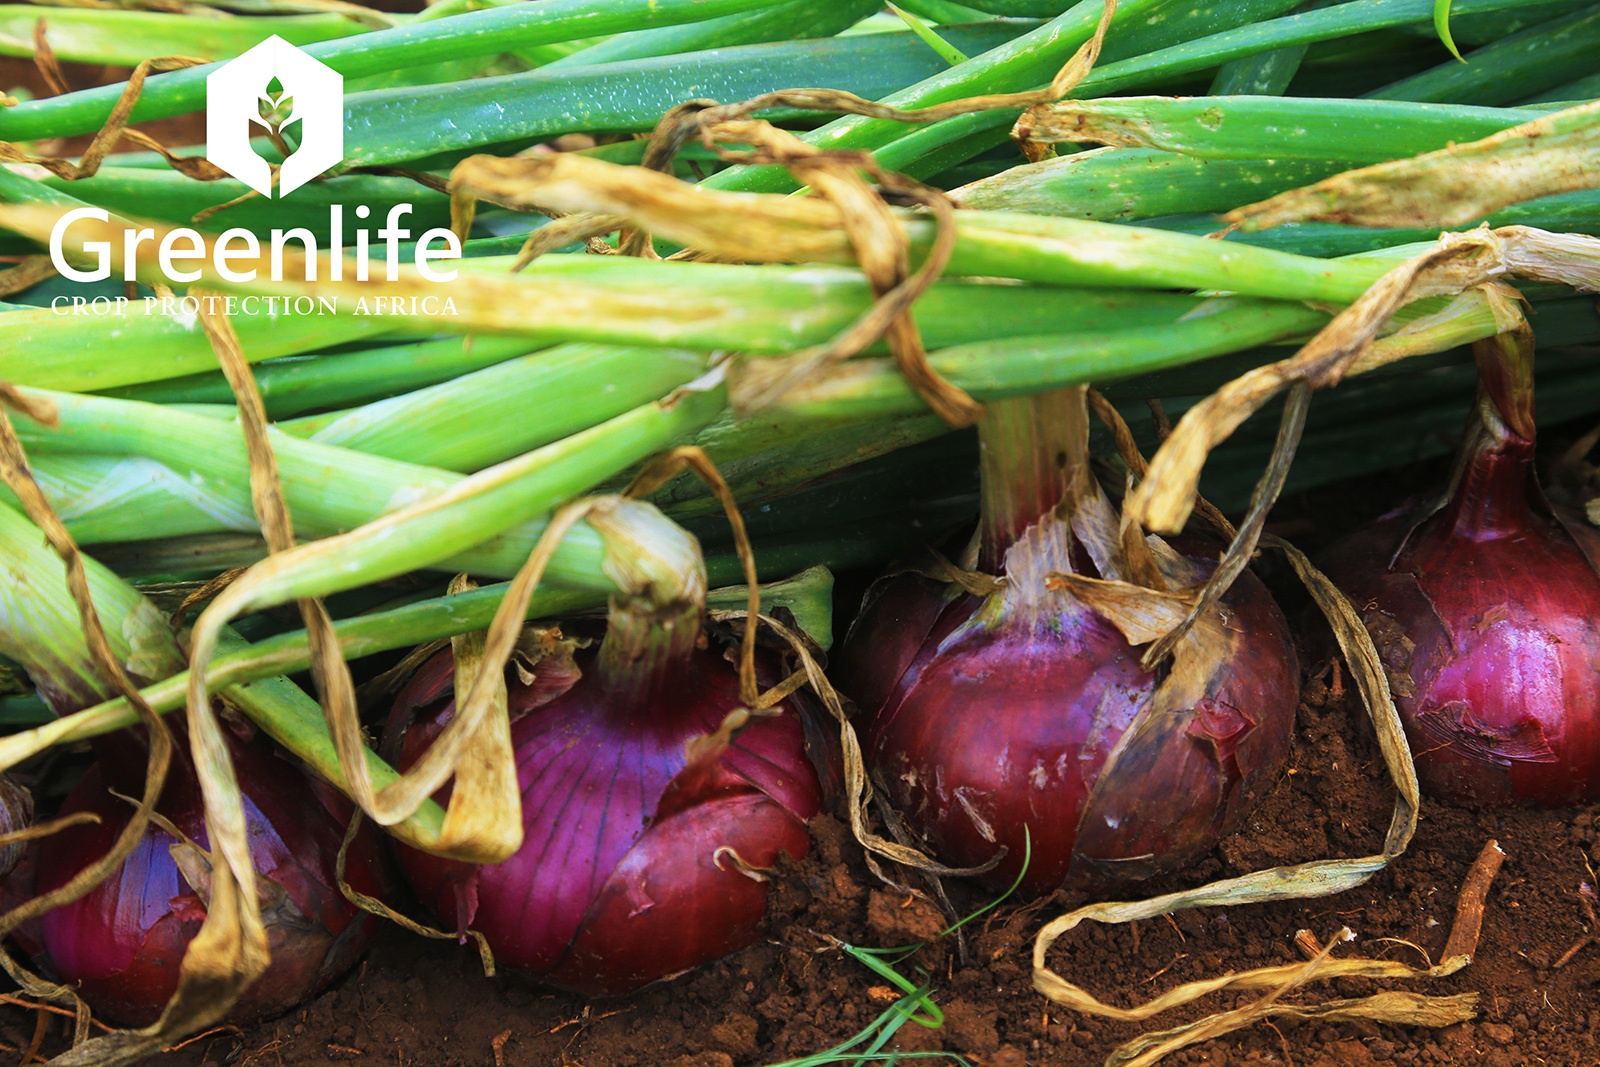 Onion farming in Kenya- Greenlife Crop Protection Africa